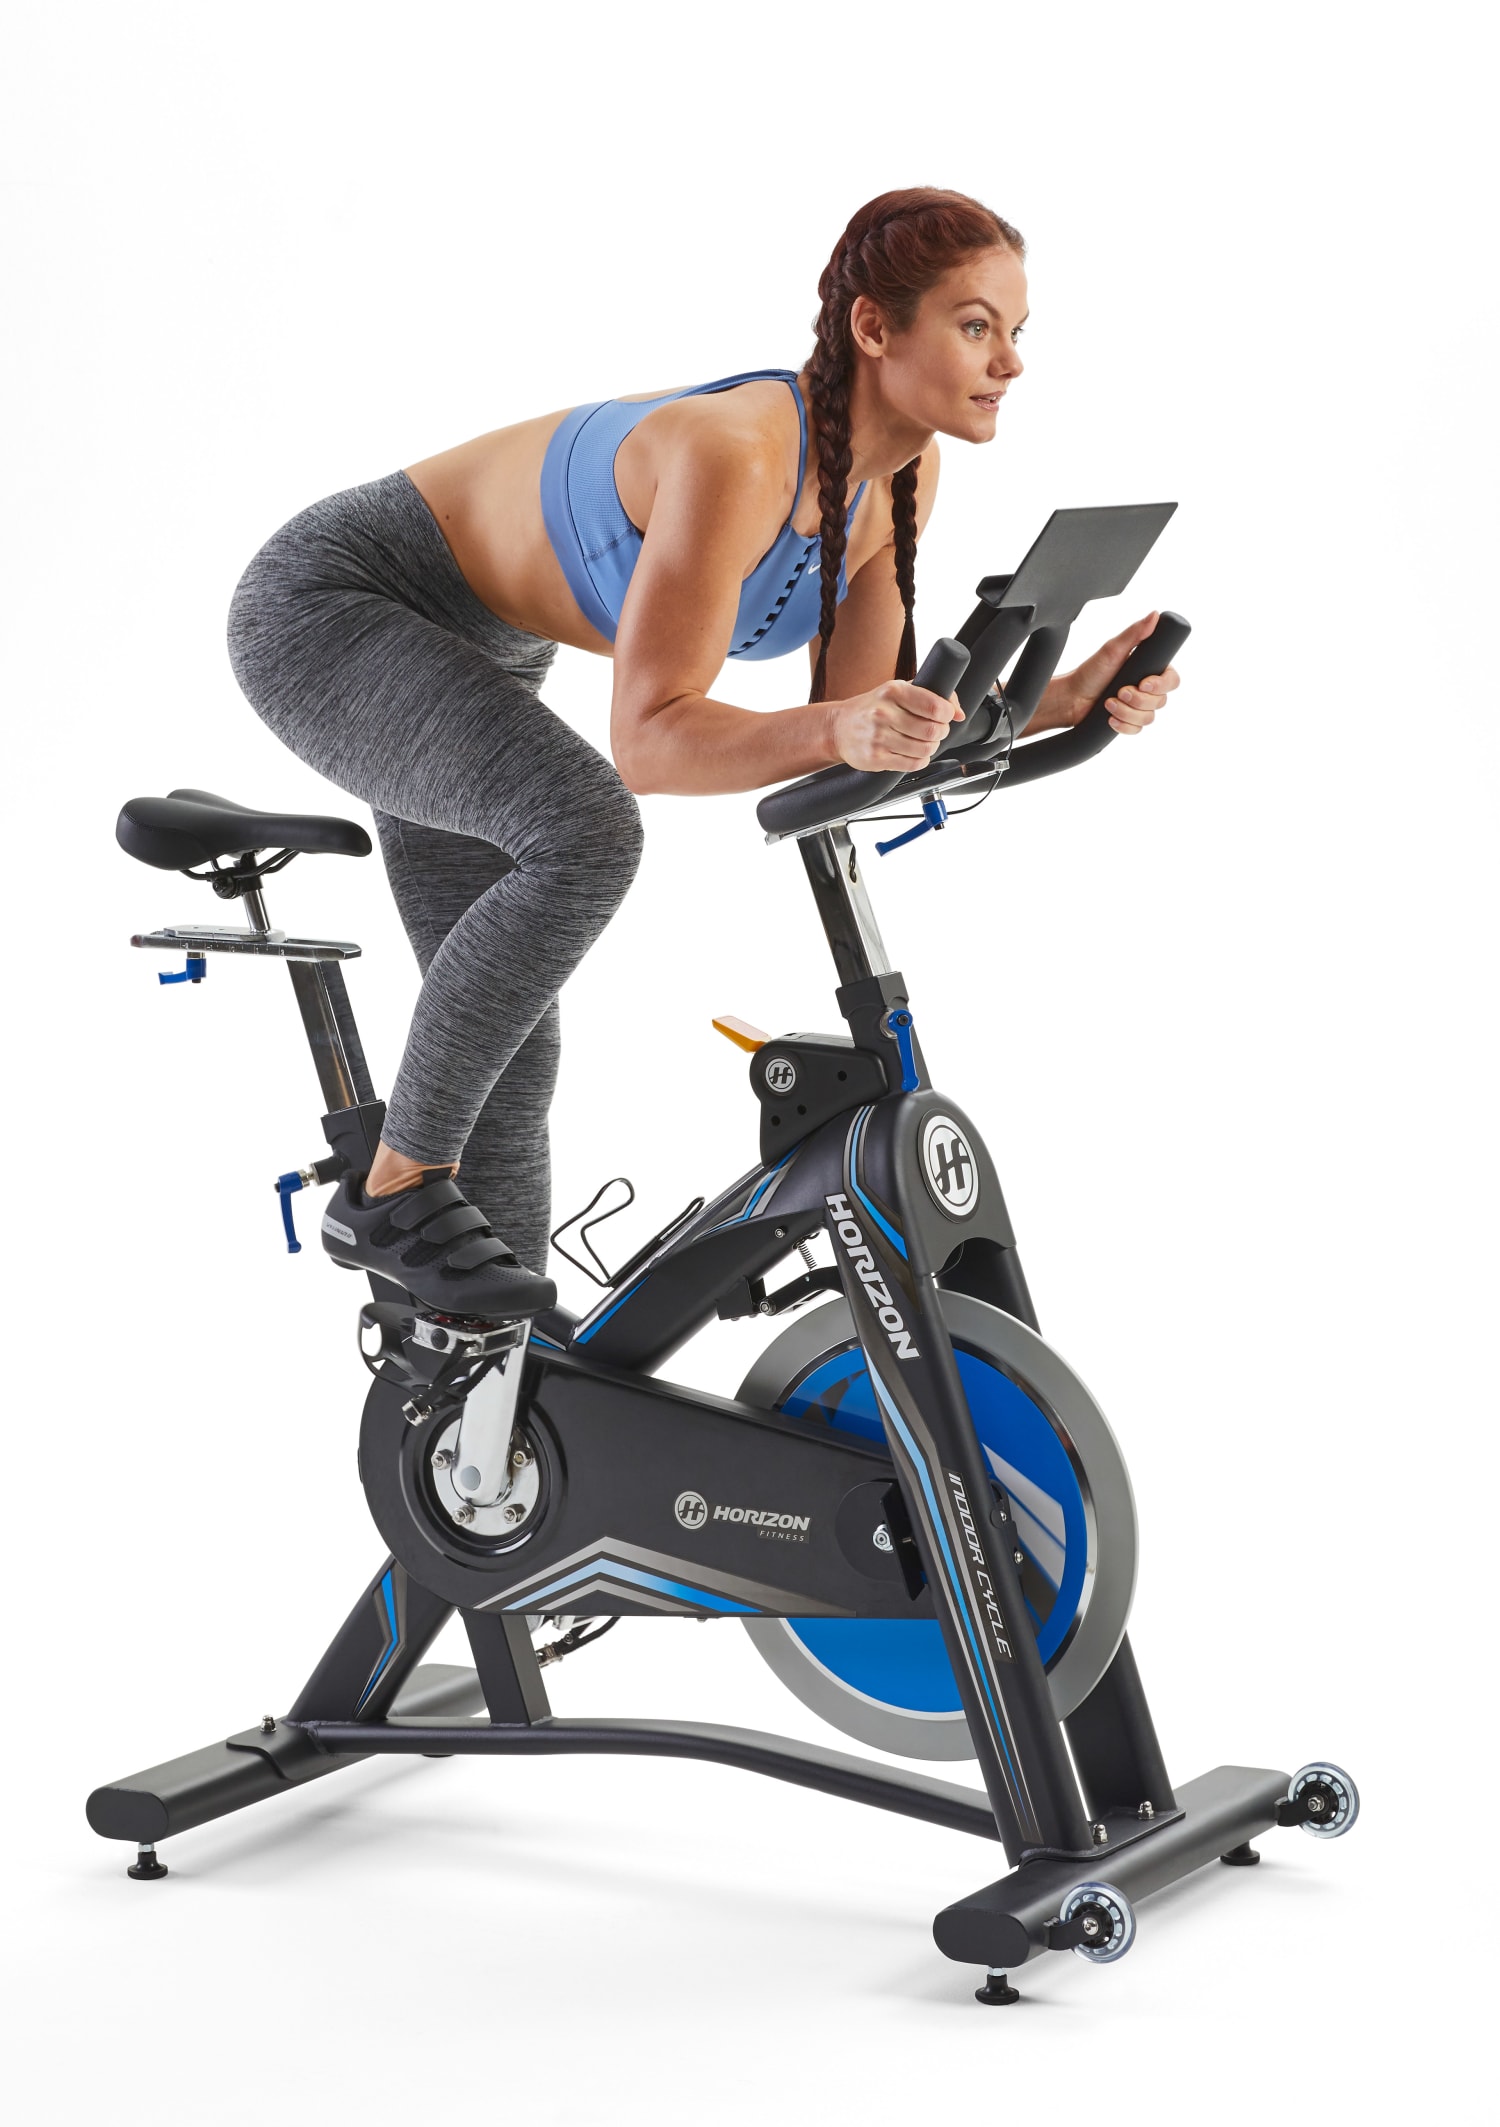 spin bike with interactive screen